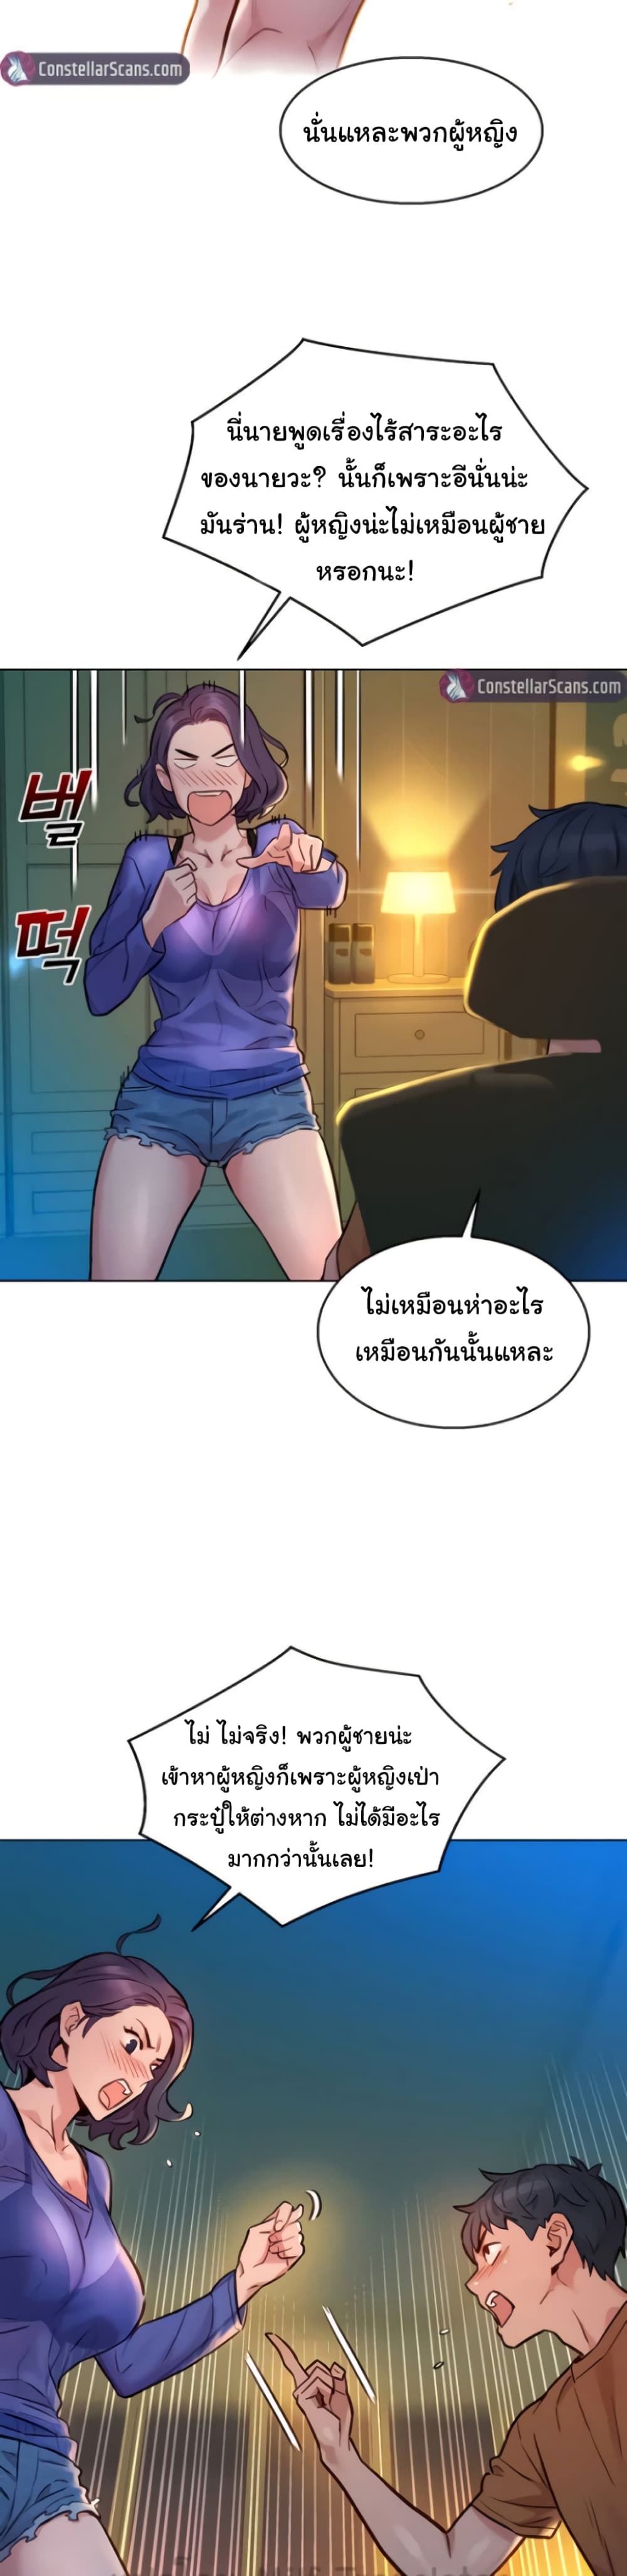 Let’s Hang Out from Today ตอนที่ 1 ภาพ 42